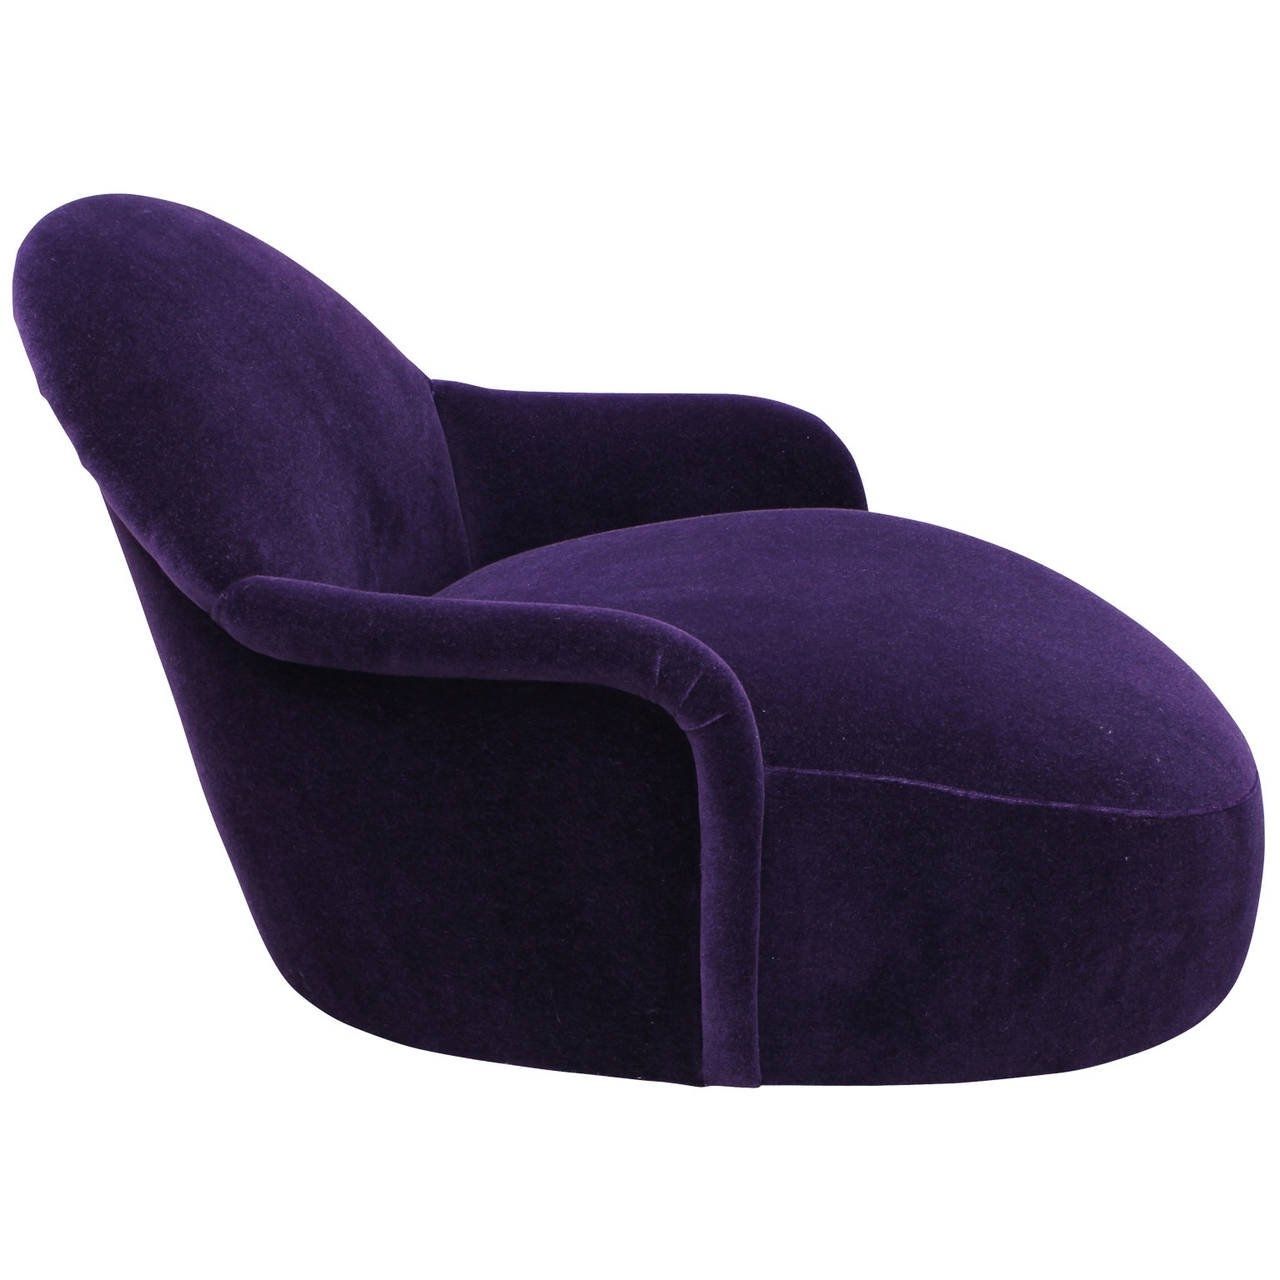 Widely Used Incredible Milo Baughman Swivel Chaise In Purple Mohair Velvet At Throughout Purple Chaise Lounges (View 9 of 15)